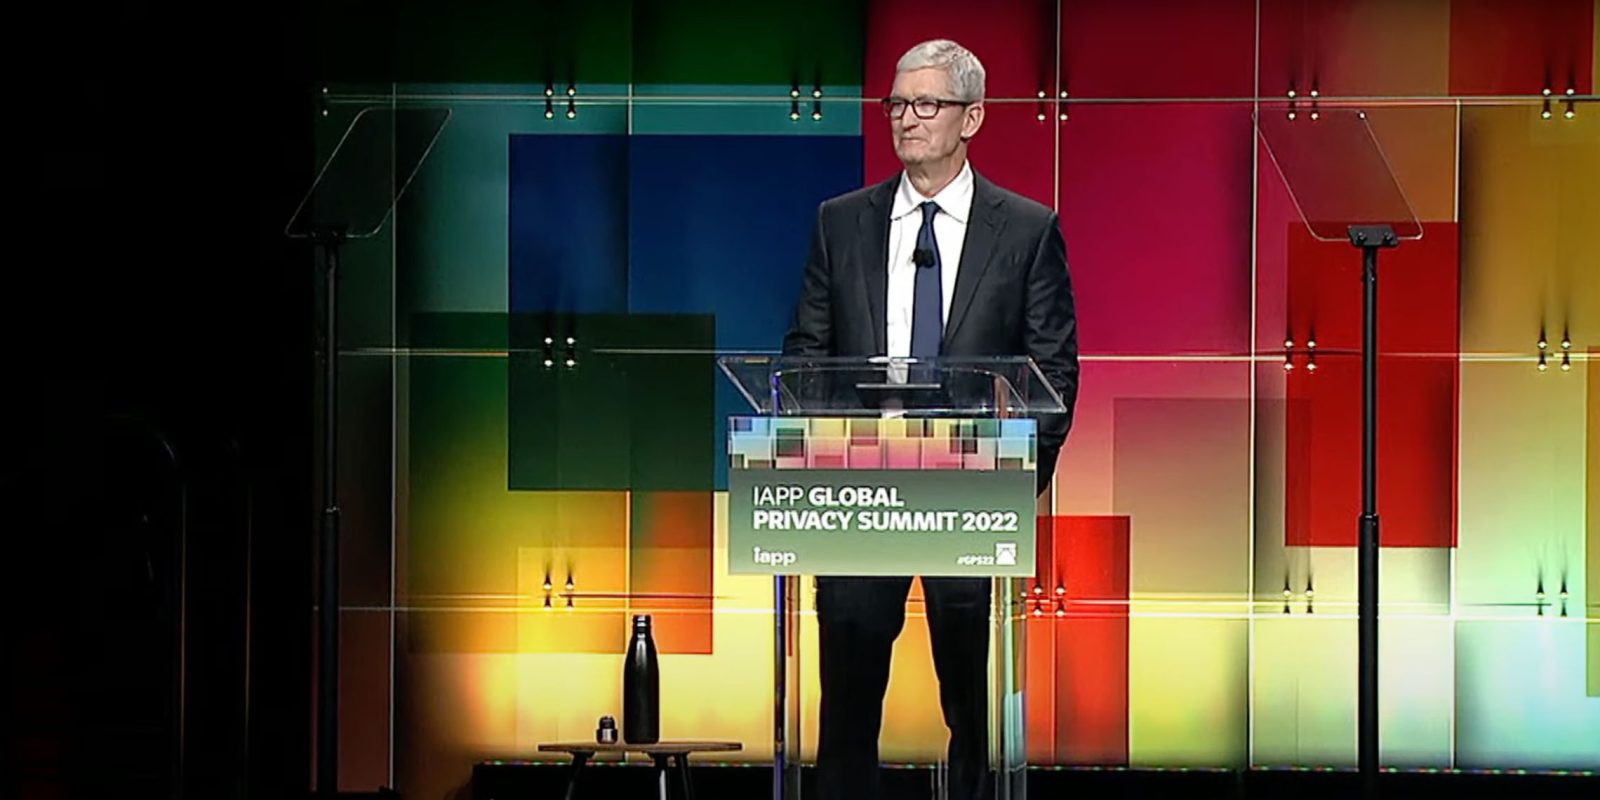 Tim Cook on stage | Tim Cook privacy speech at the IAPP Summit